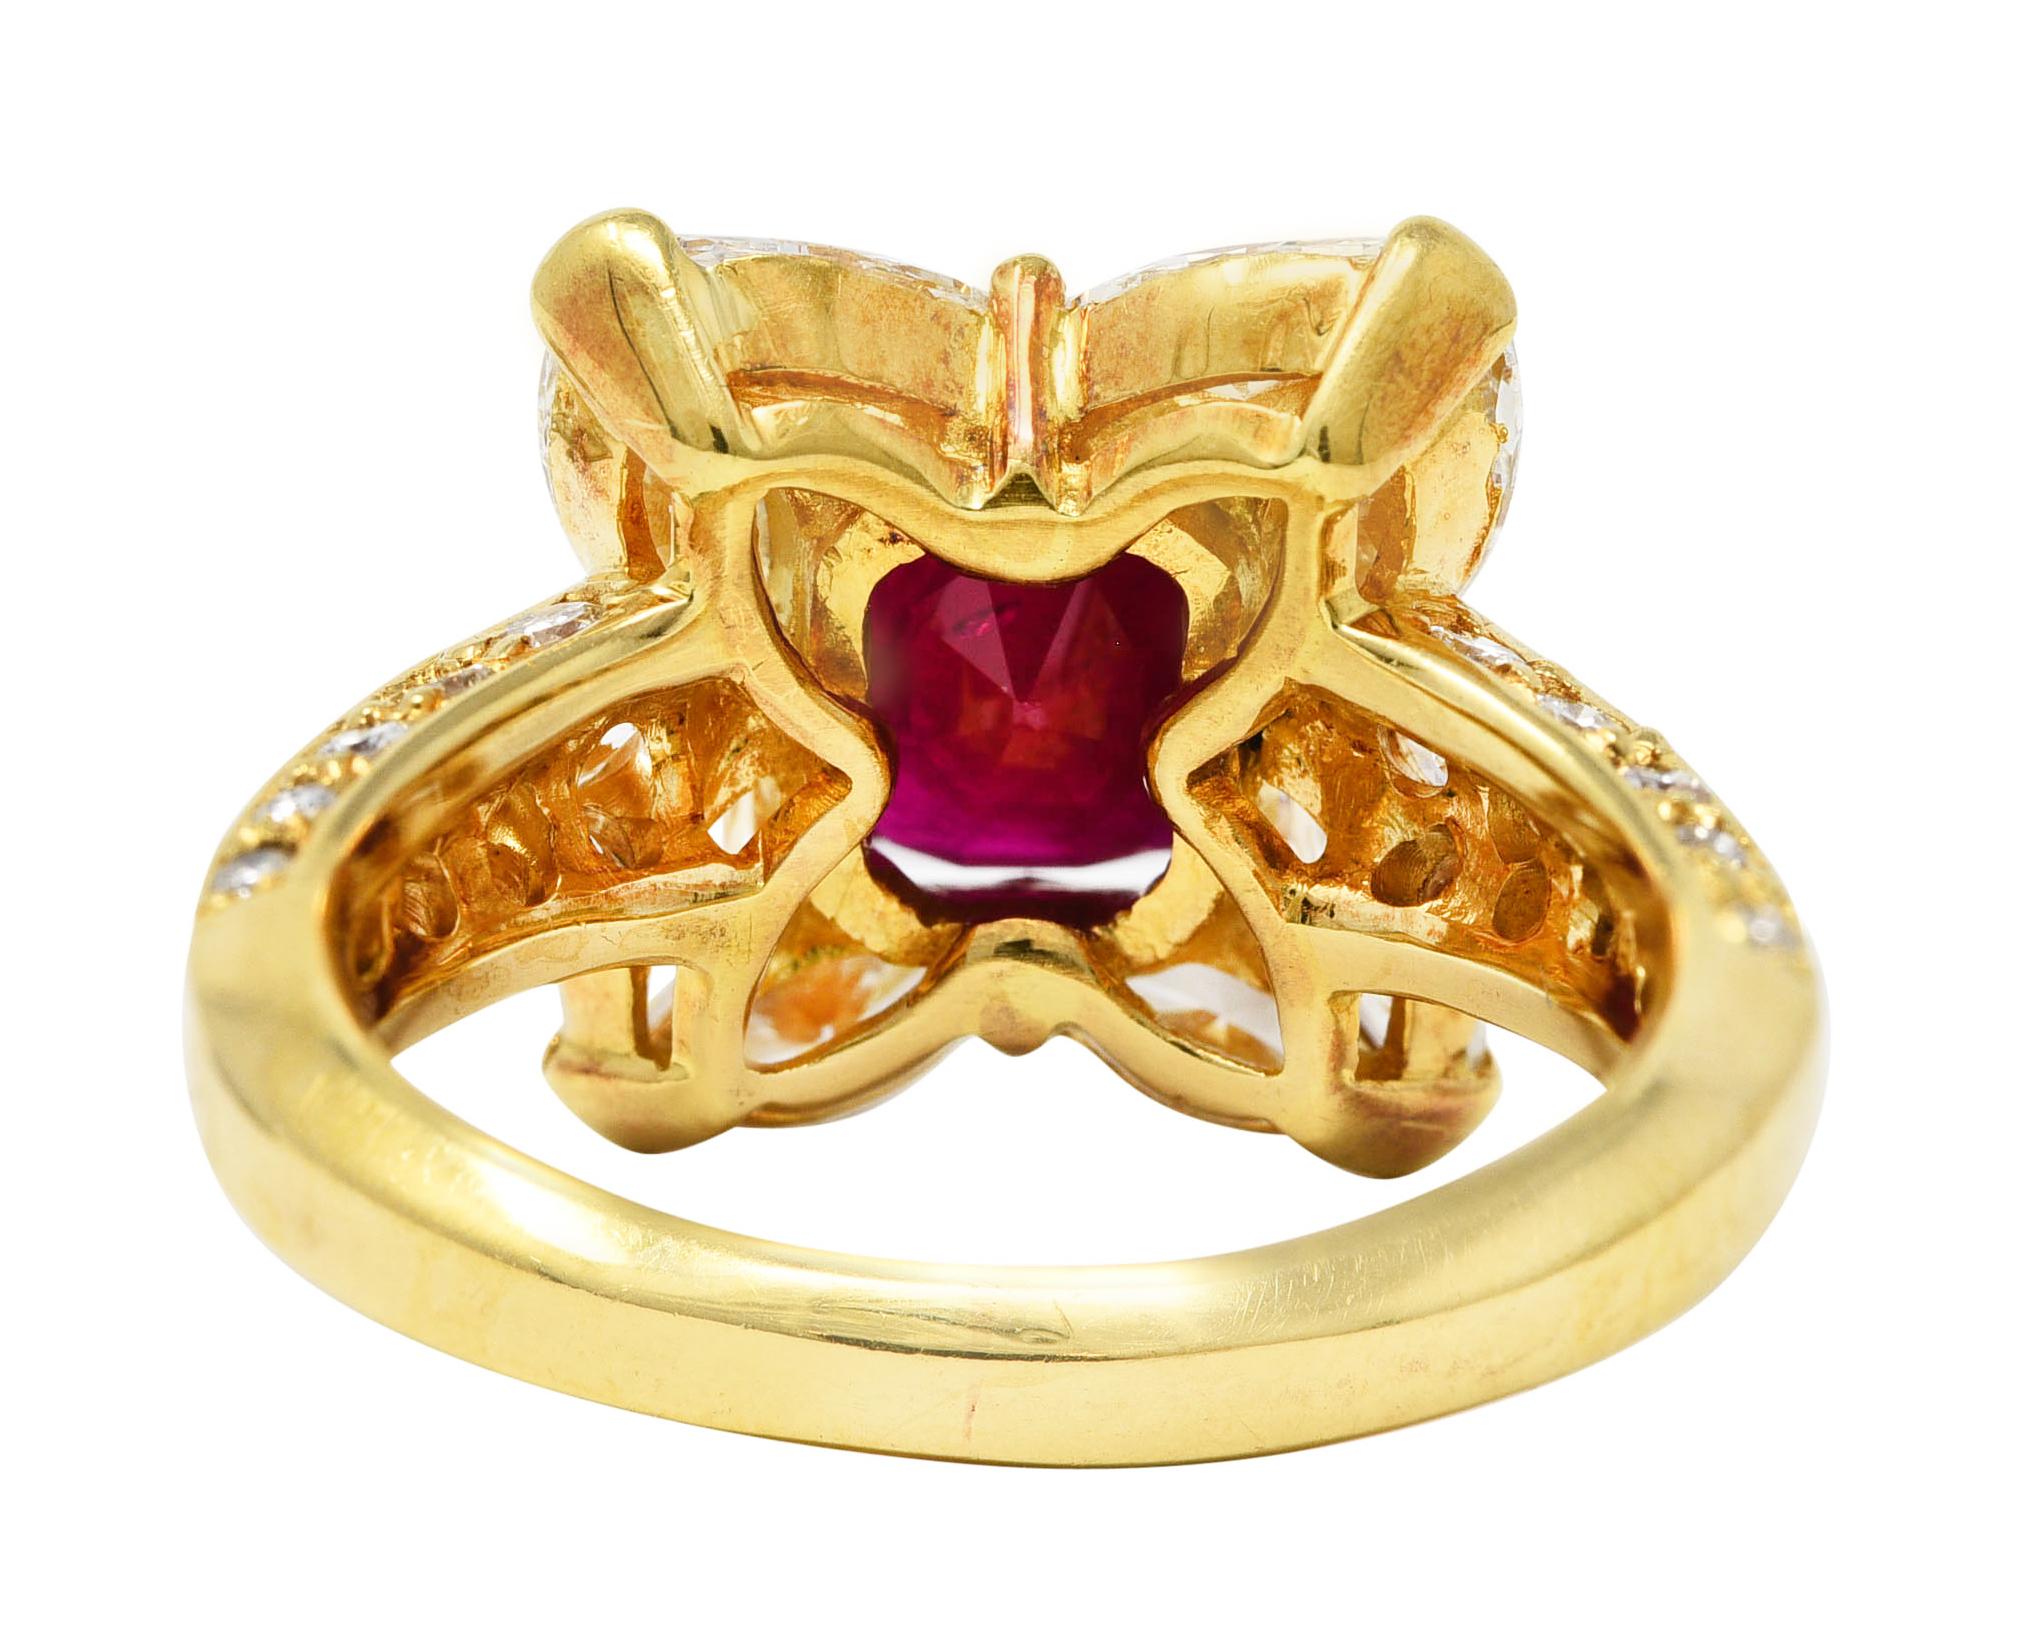 Women's or Men's Vintage 3.49 Carats Emerald Cut Ruby Diamond 18 Karat Yellow Gold Cluster Ring For Sale